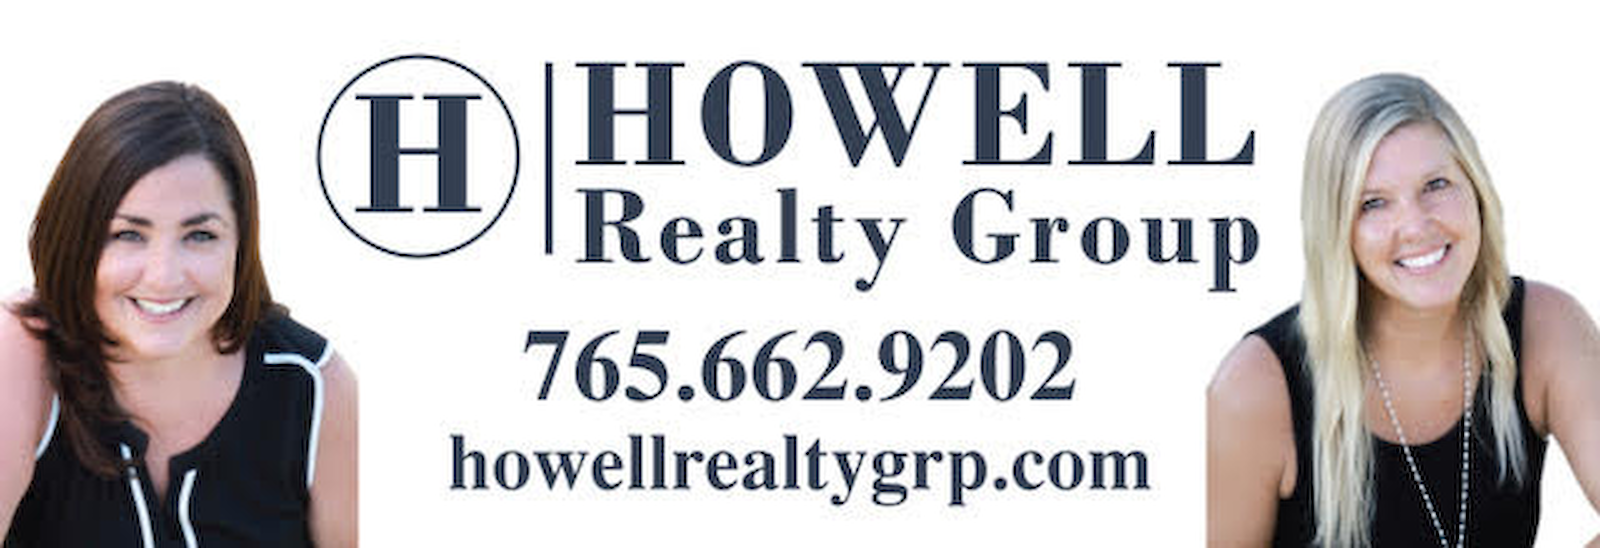 Howell Realty Group